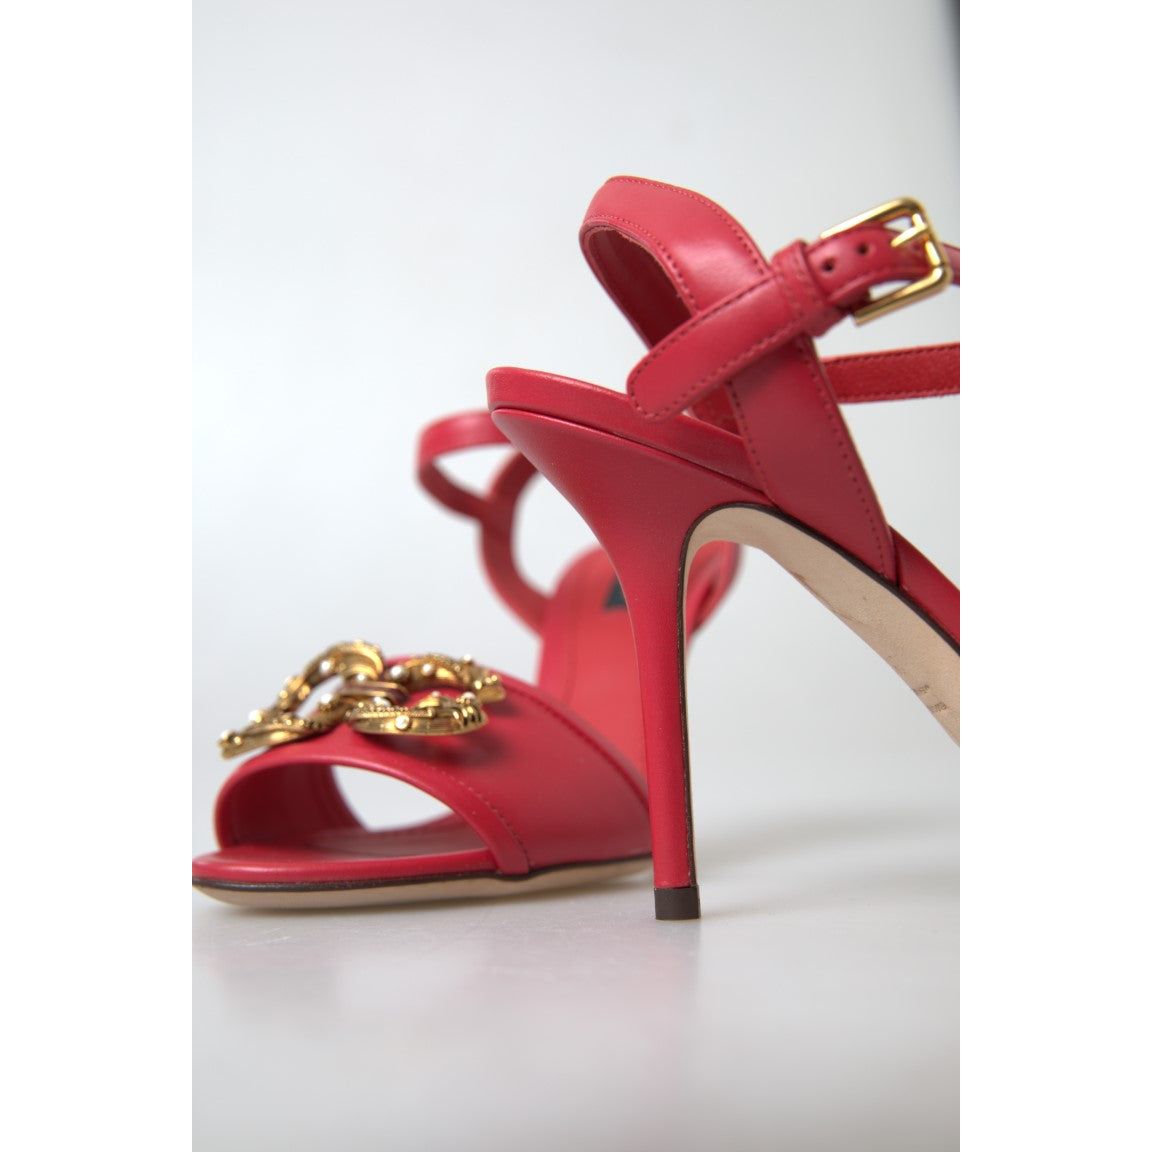 Dolce & Gabbana Red Stiletto Sandal Heels red-ankle-strap-stiletto-heels-sandals-shoes 465A9955-Medium-be46c472-22a.jpg